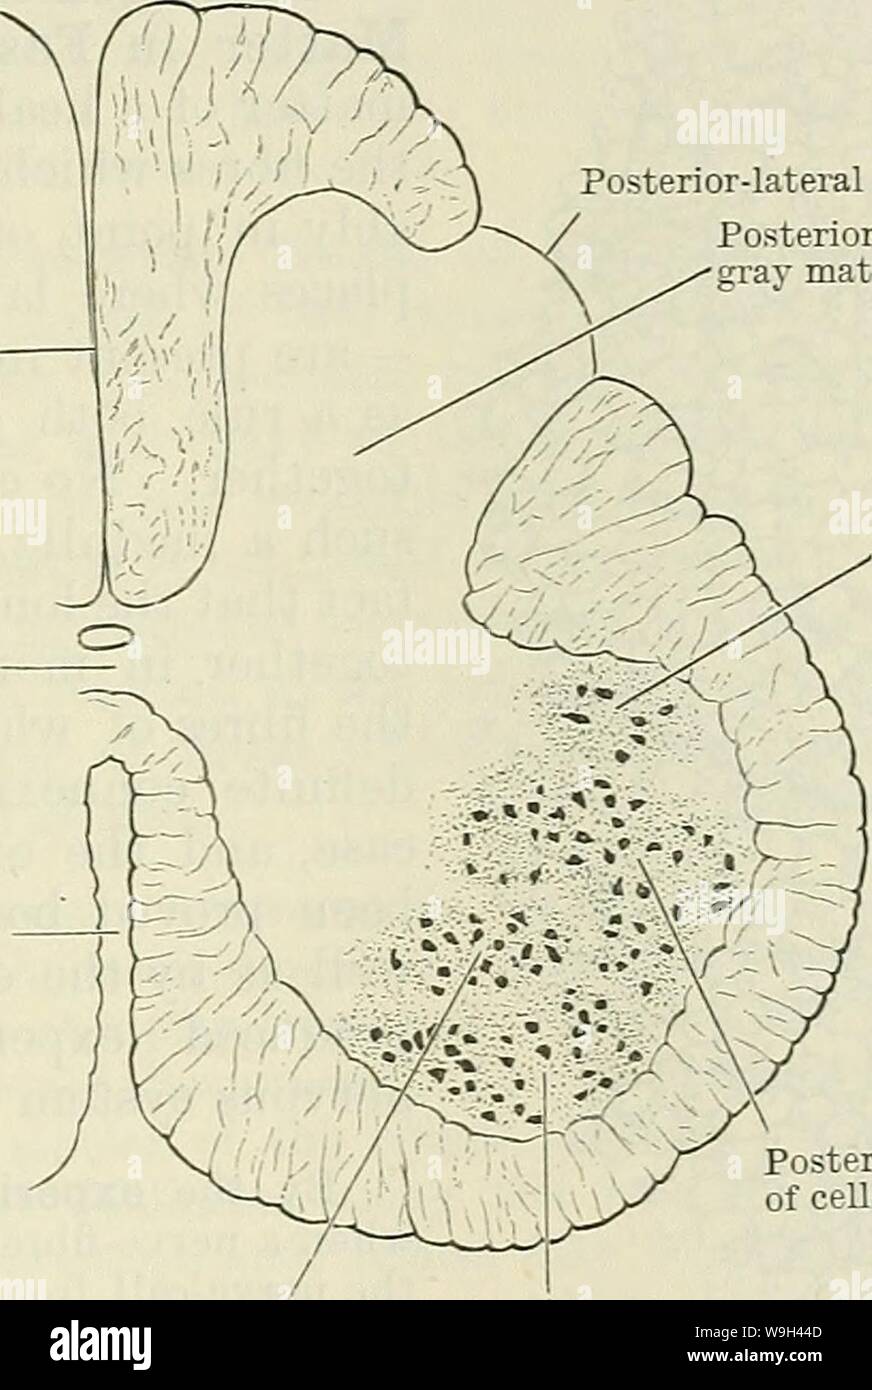 Archive image from page 564 of Cunningham's Text-book of anatomy (1914). Cunningham's Text-book of anatomy  cunninghamstextb00cunn Year: 1914 ( THE WHITE MATTEE OF THE SPINAL MEDULLA. 531 Posterior- median septum Gray commis- sure Anterior median fissure Posterior-lateral furrow Posterior column of gray matter Retro-postero- lateral group of cells stitute the white rami communicantes. They represent the splanchnic efferent fibres of the medulla spinalis. Nucleus Dorsalis (O.T. Clarke's Column).—This occupies the posterior column of gray matter and is the most conspicuous of all the cell-groups Stock Photo